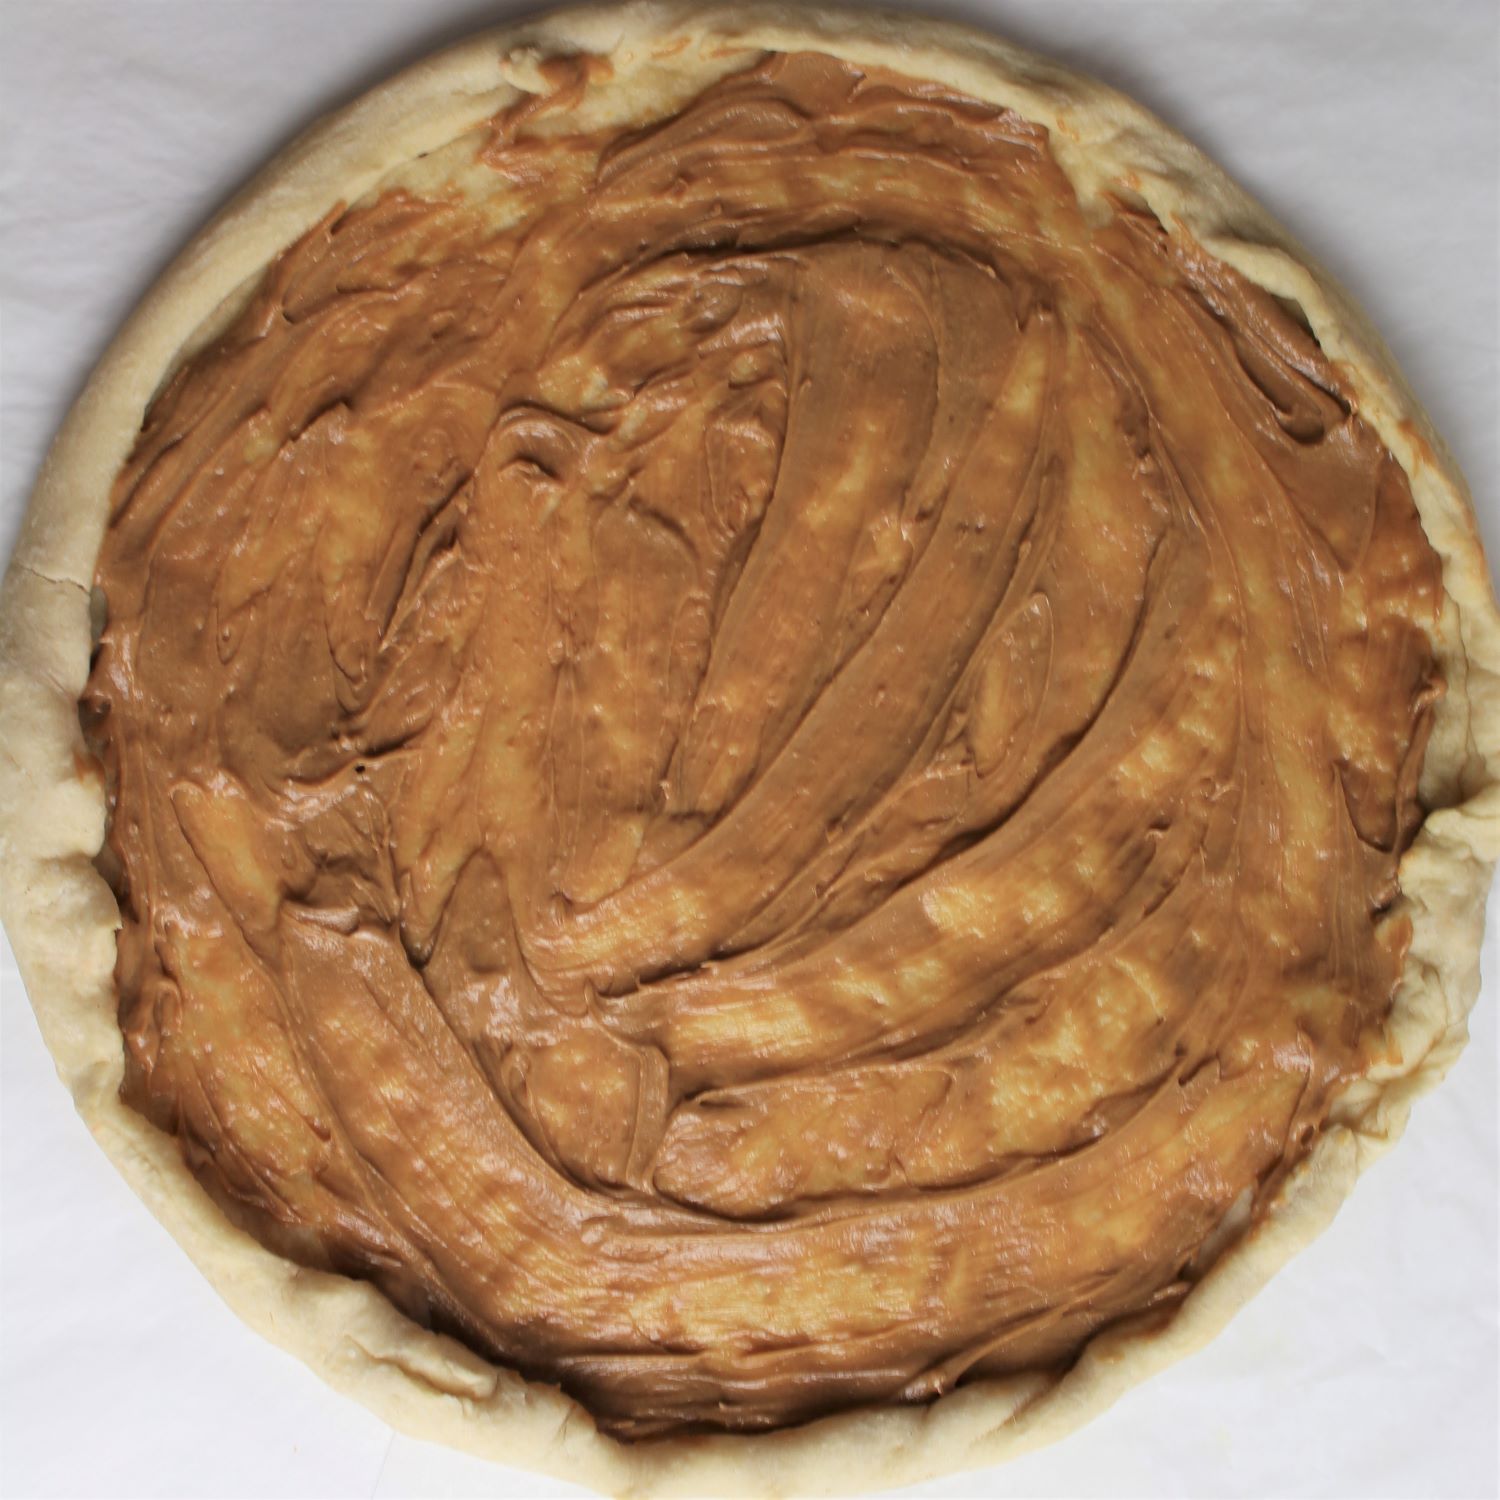 par-baked crust covered with peanut sauce